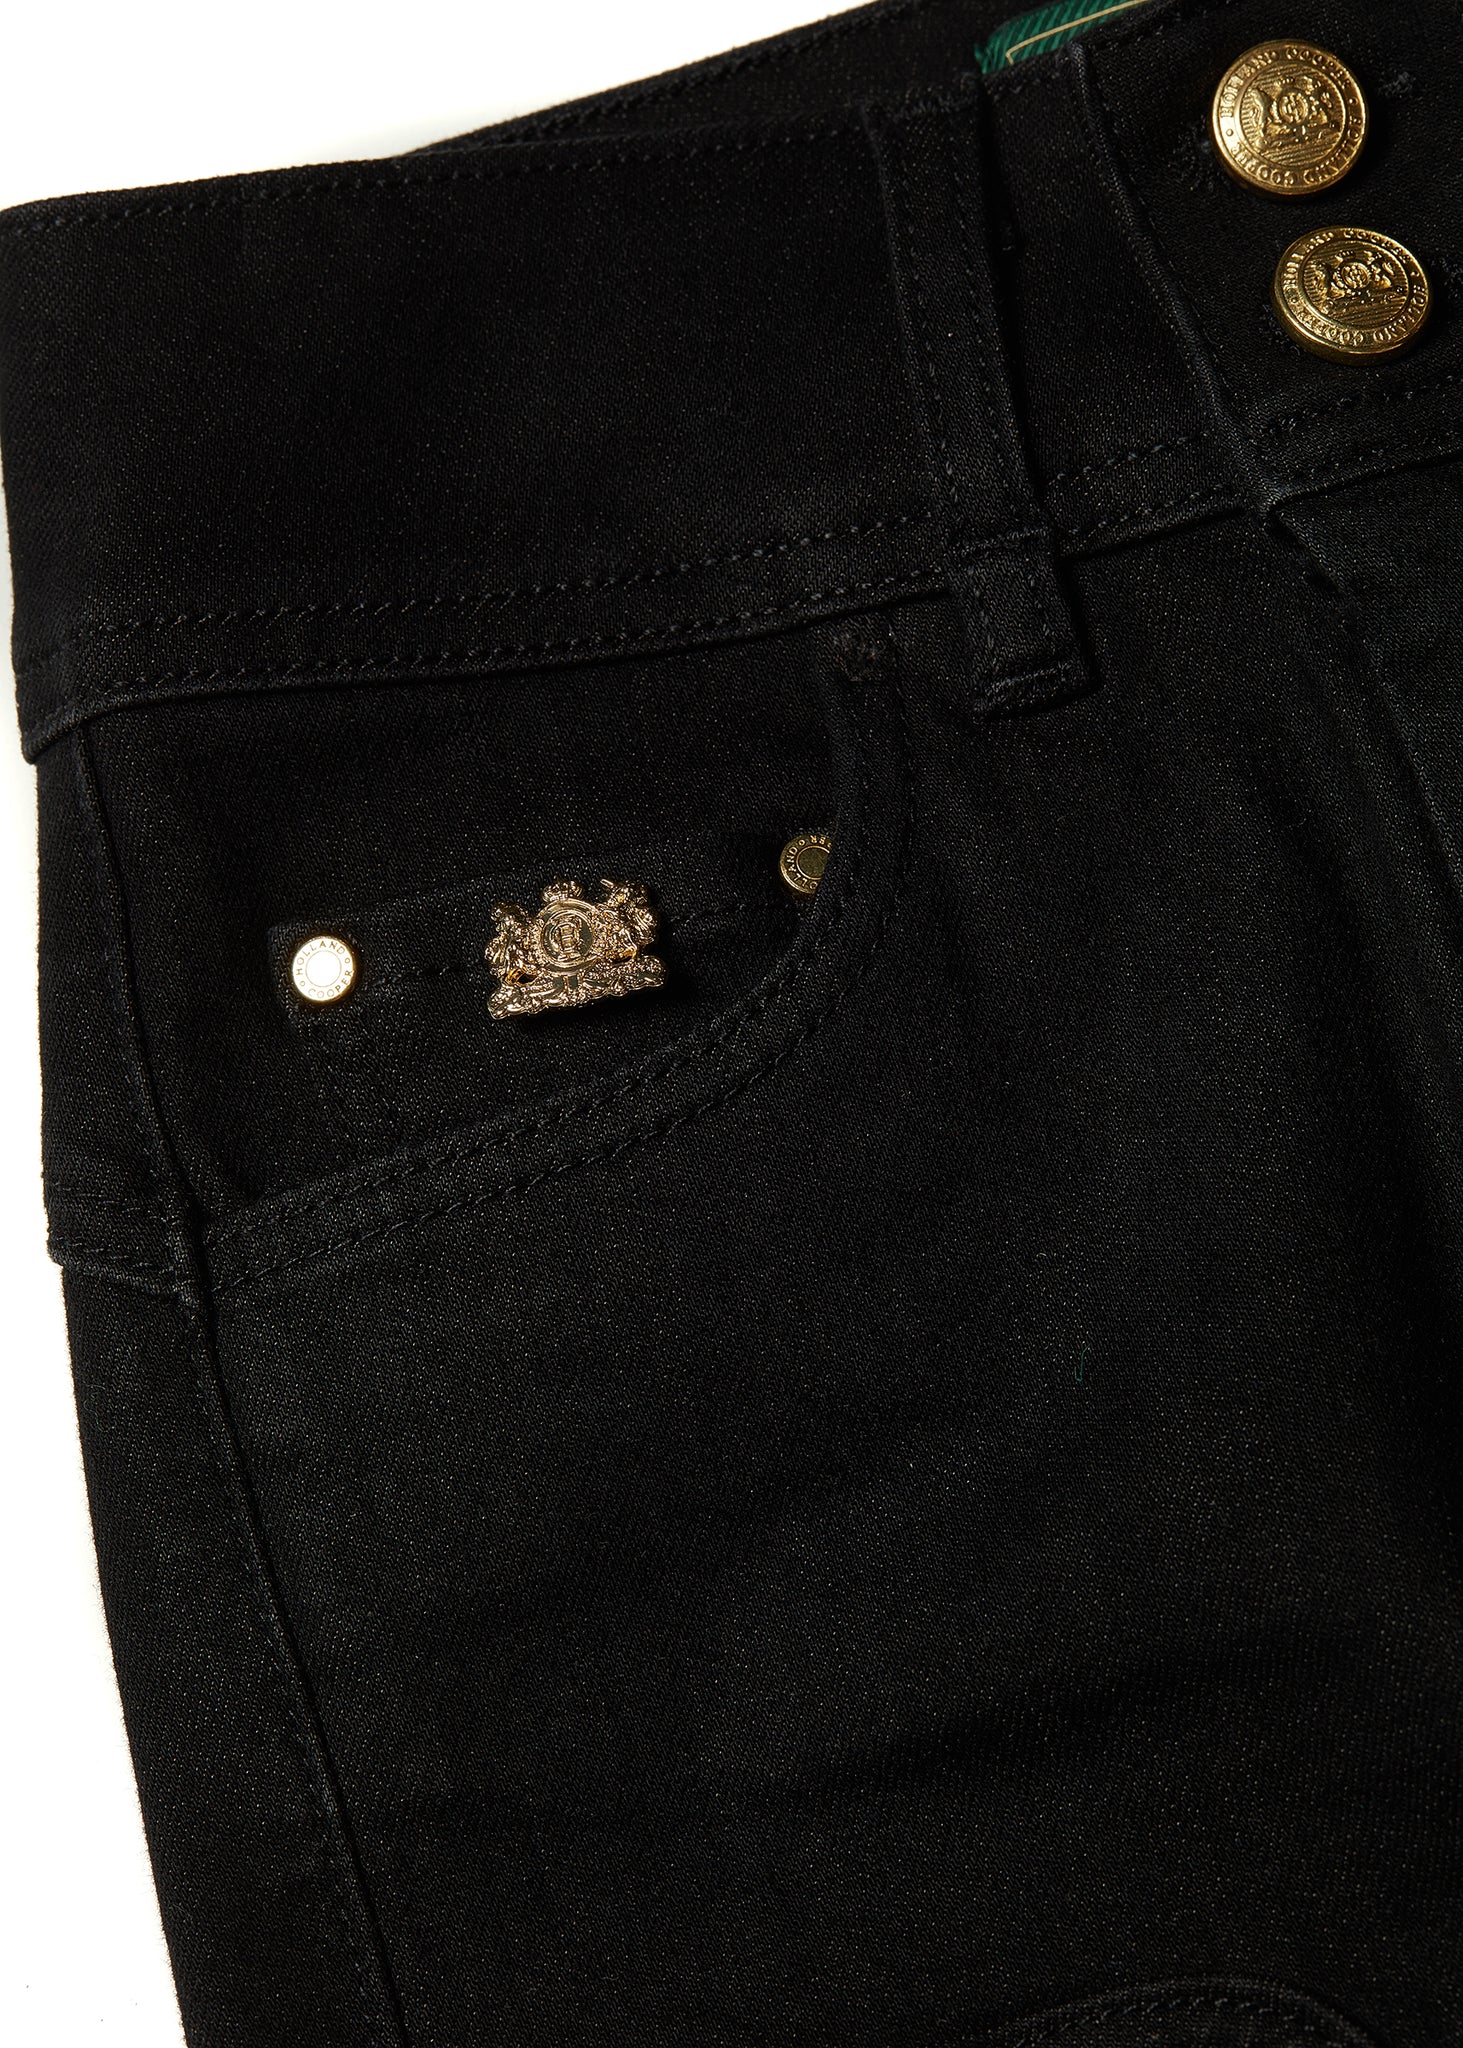 hc gold crest detail on front right pocket on womens high rise black denim skinny stretch thermal jean with jodhpur style seams and two open pockets to the front and back with internal fleece lining